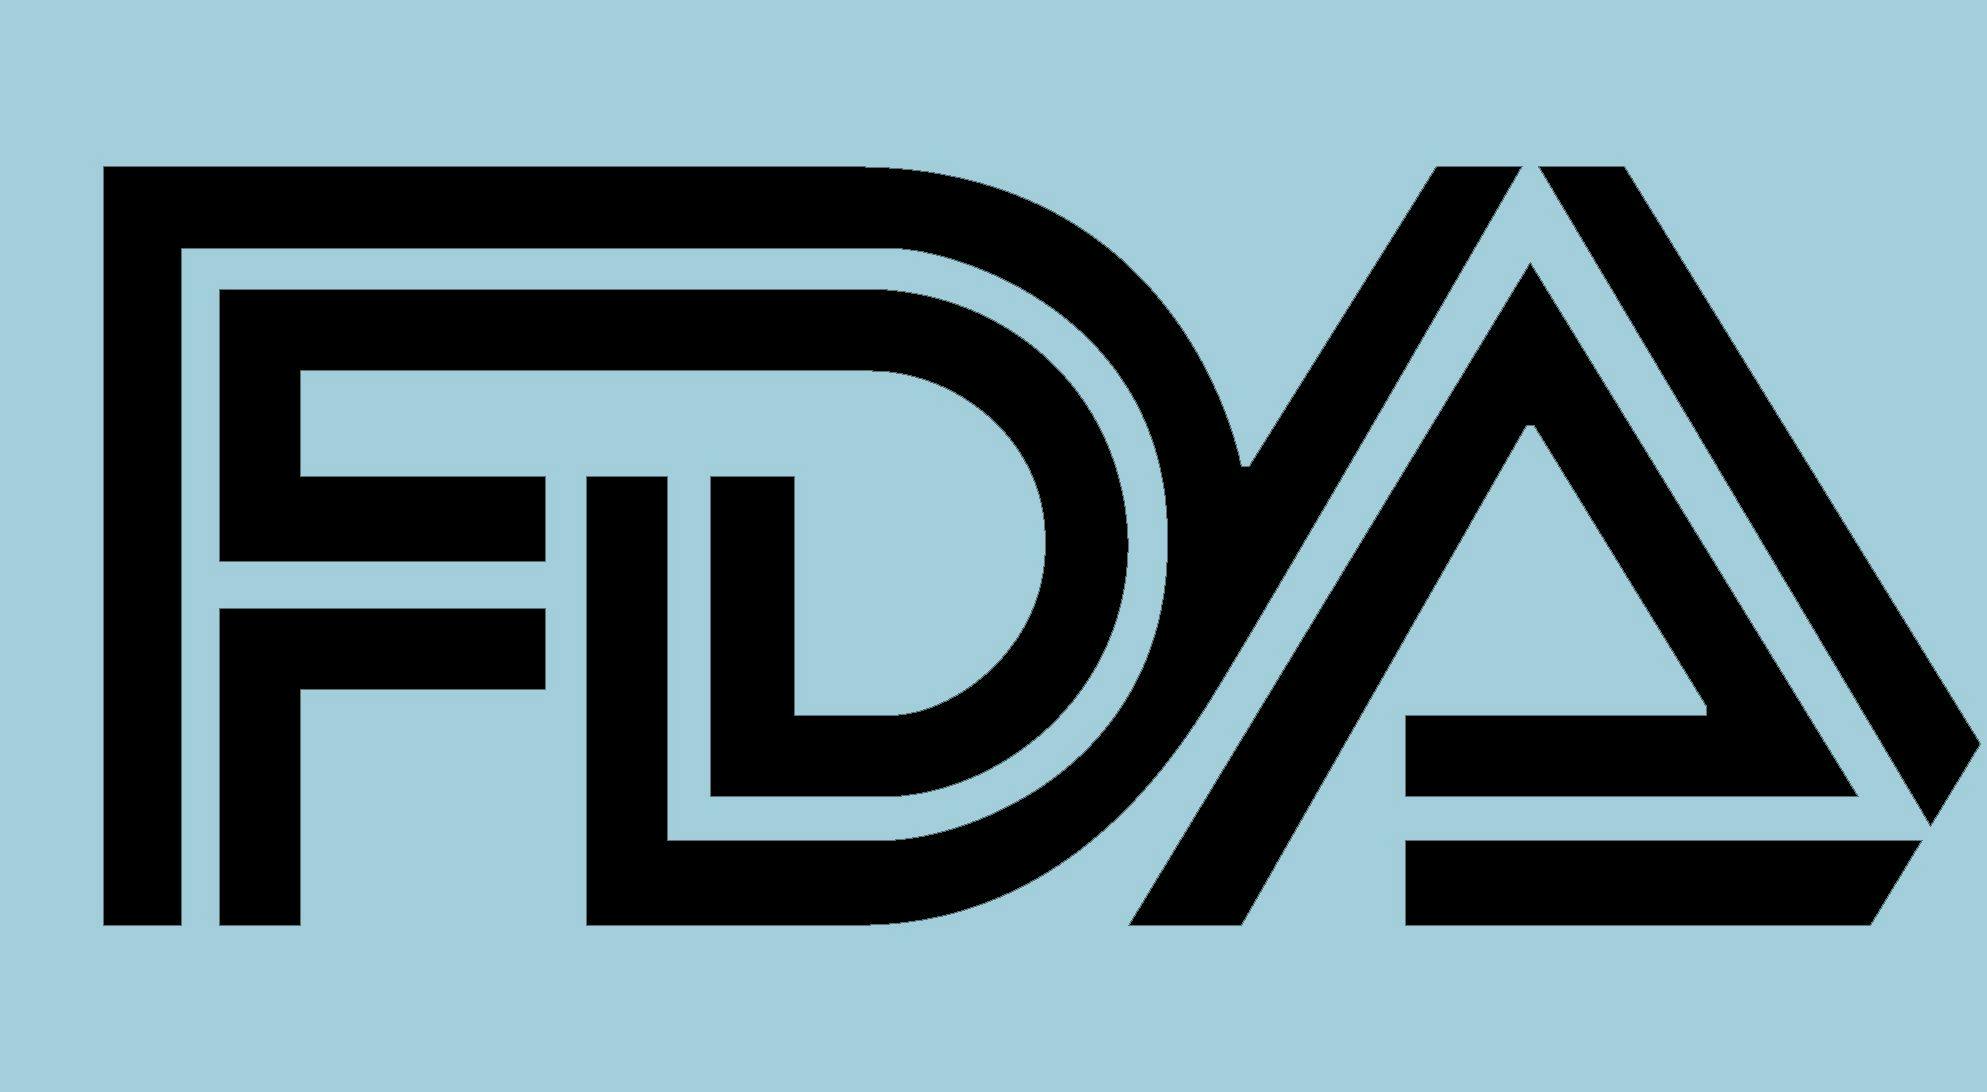 Image of FDA logo with a light blue background.